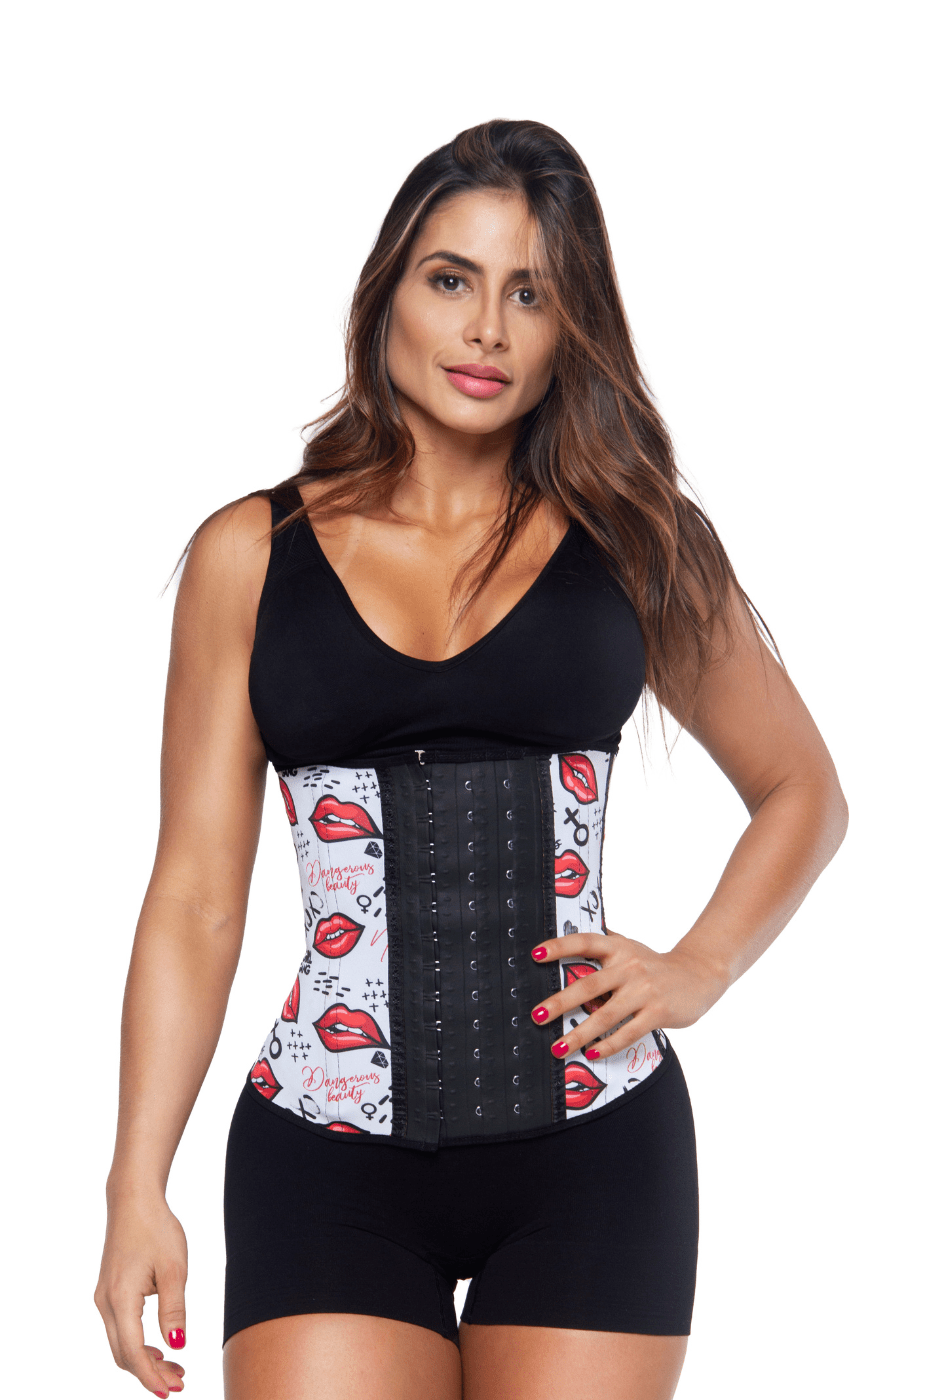 What Results Can You Expect from Waist Training? – SqueezMeSkinny